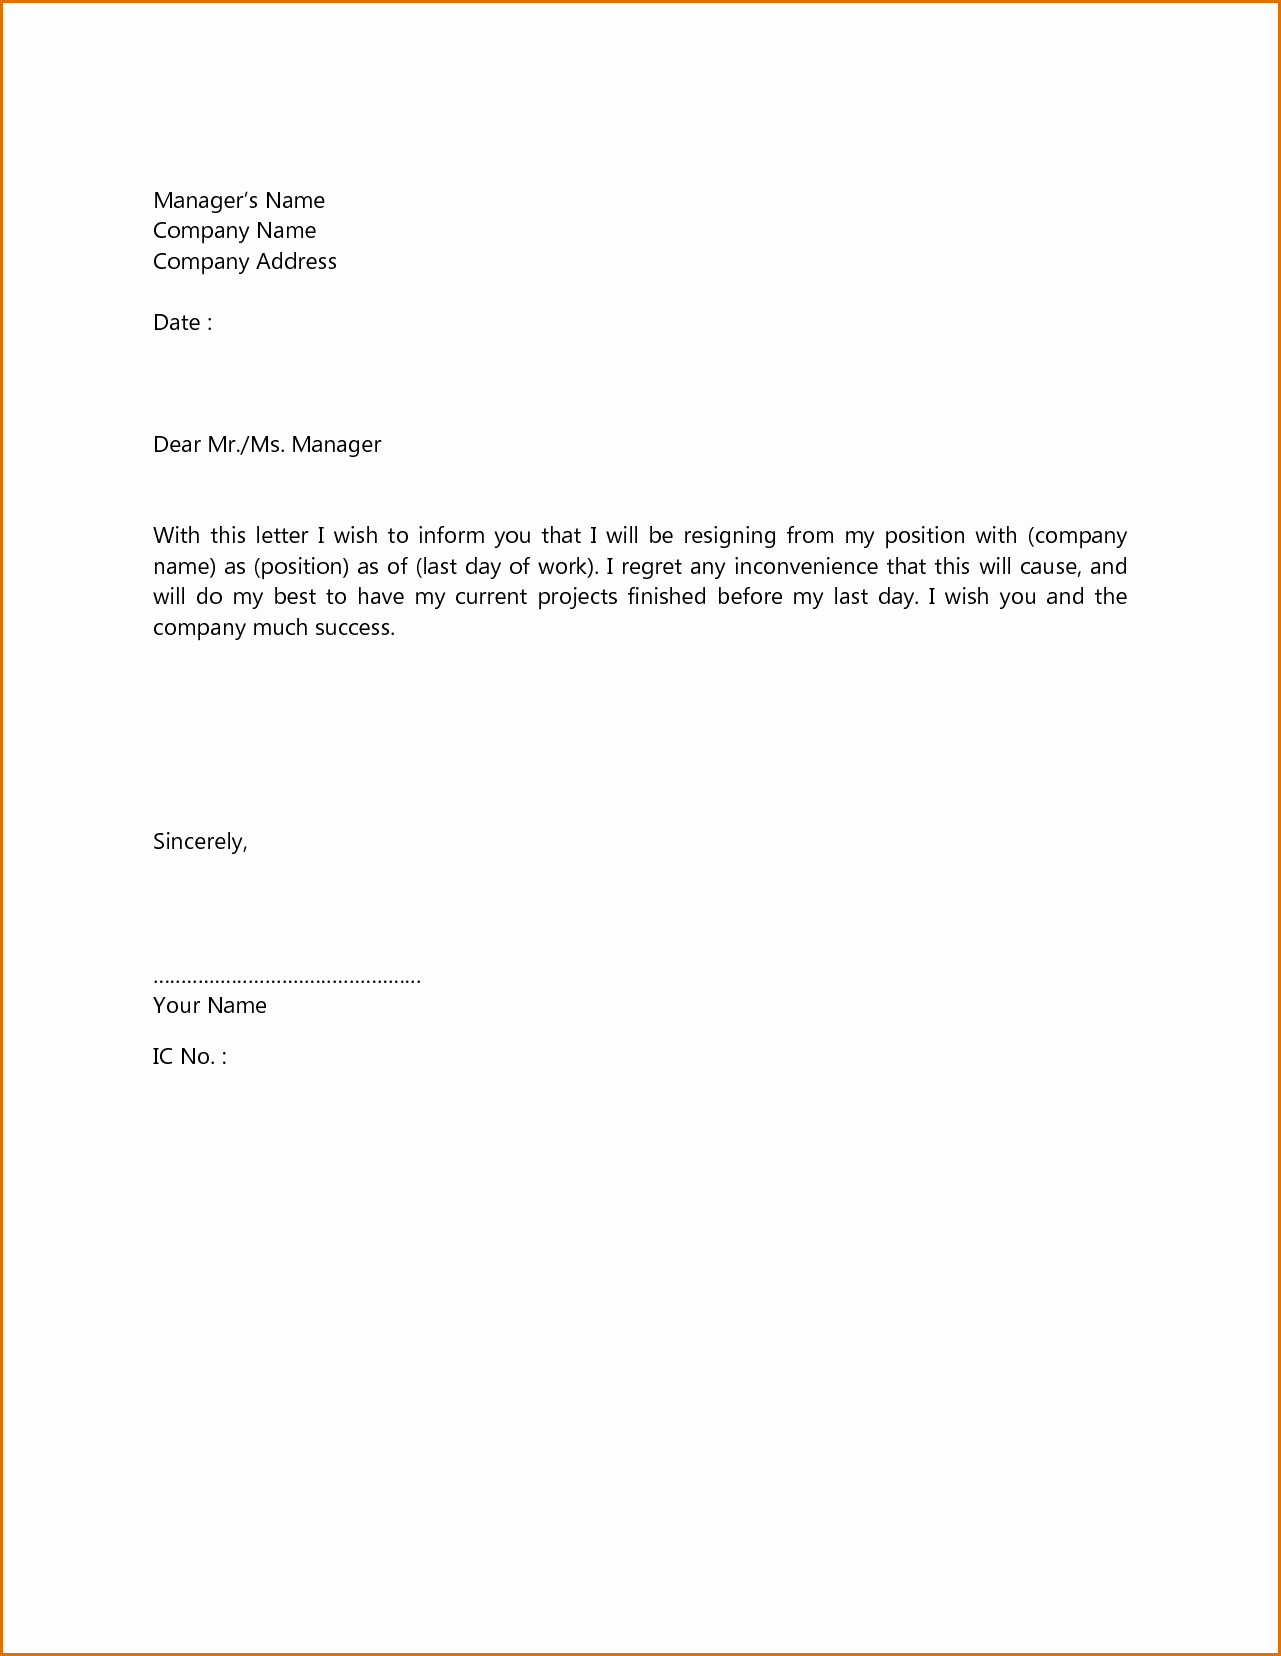 Simple Job Cover Letter Examples Awesome Simple format Resignation Letter Resume Layout 2017